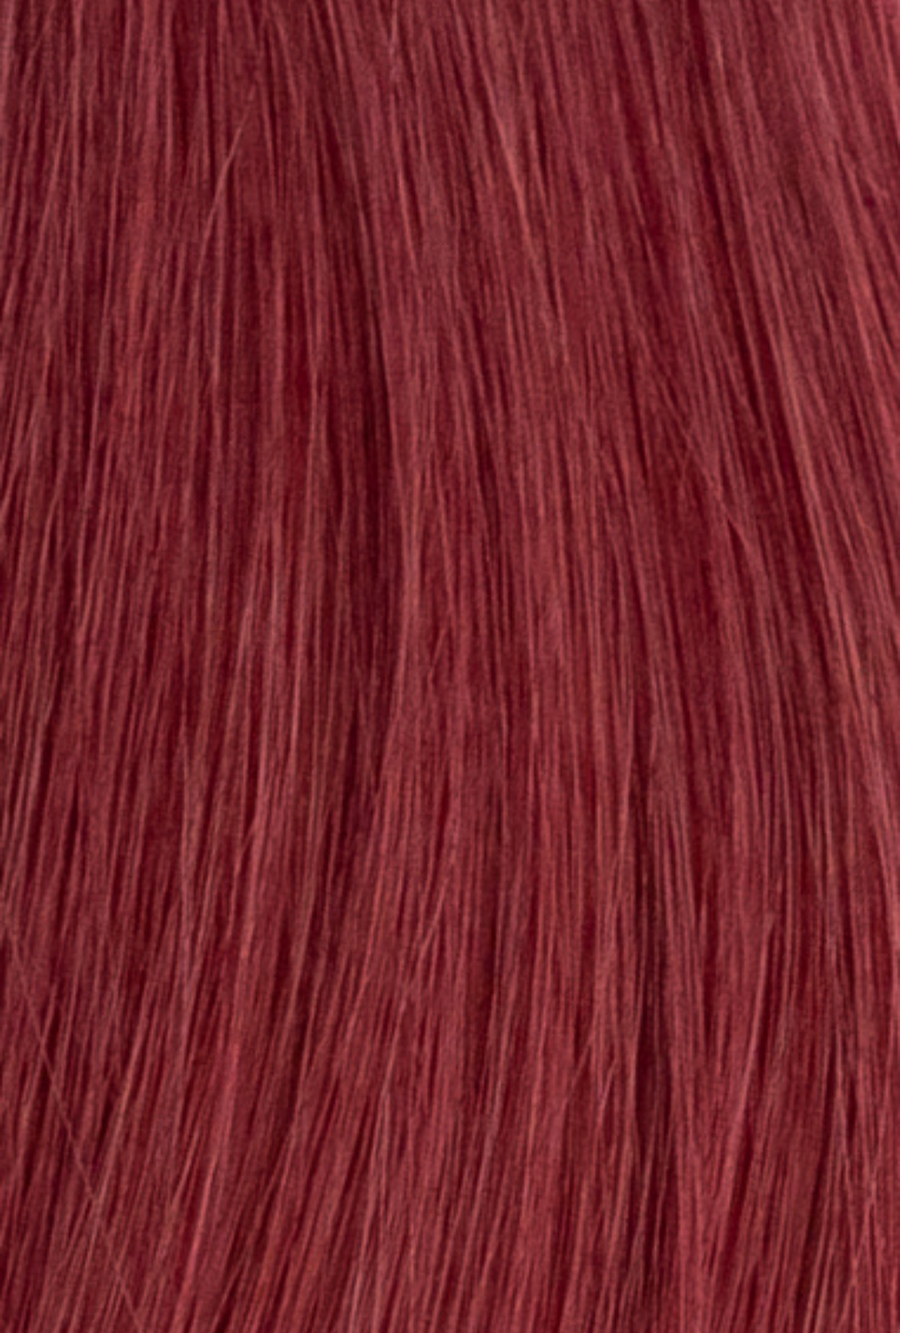 Laced Hair Tape-In Extensions Ruby